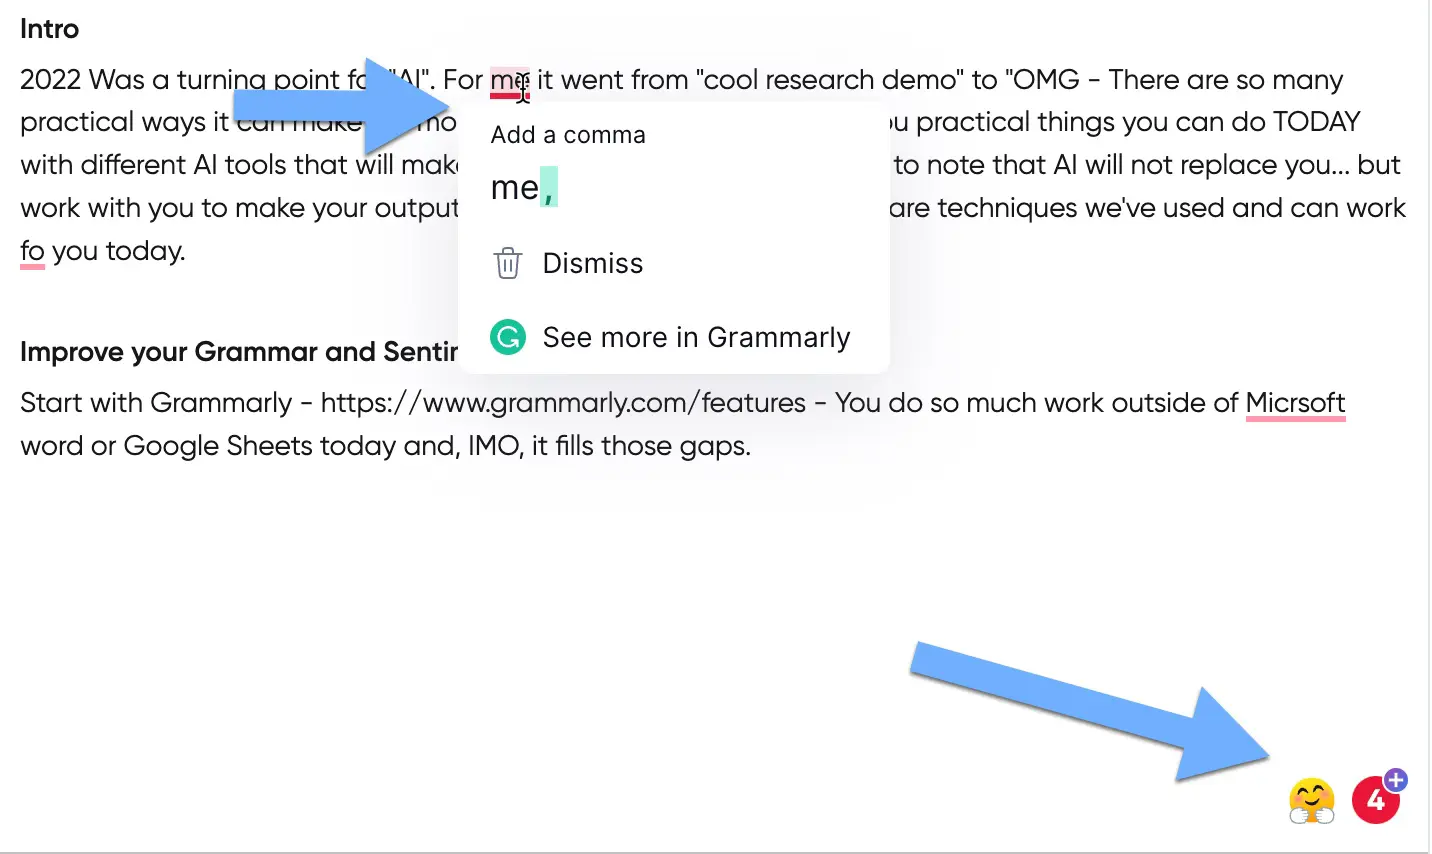 example of improving grammar, adding a comma to separate thoughts